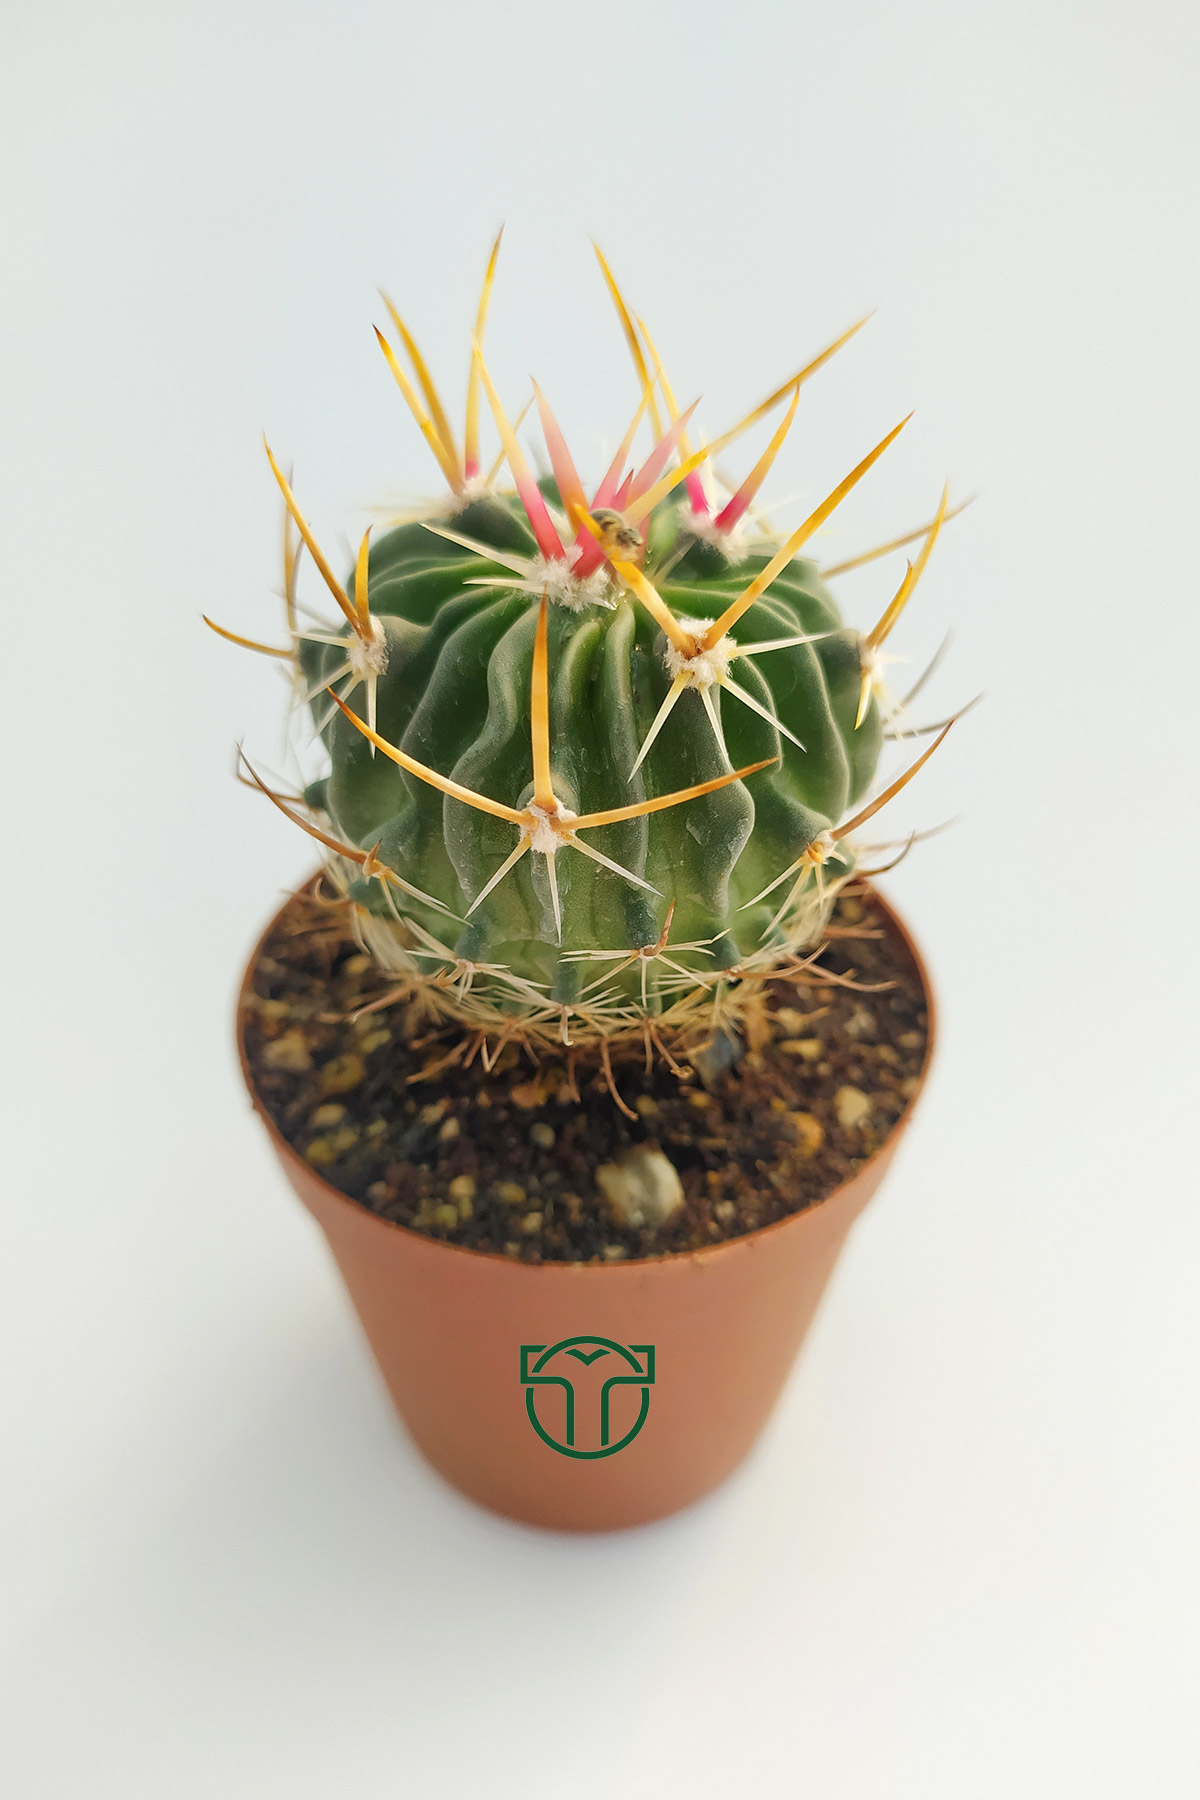 Echinofossulocactus Multicostatus Cactus in 5.5 cm pot. All products are our own production and are produced in Turkey's largest cactus production facility. The photos are our own shot, and the exact product you see in the picture will be sent. We carefully select the largest and plump products and ship them. With our special packaging method, the products are delivered to you without any problems.